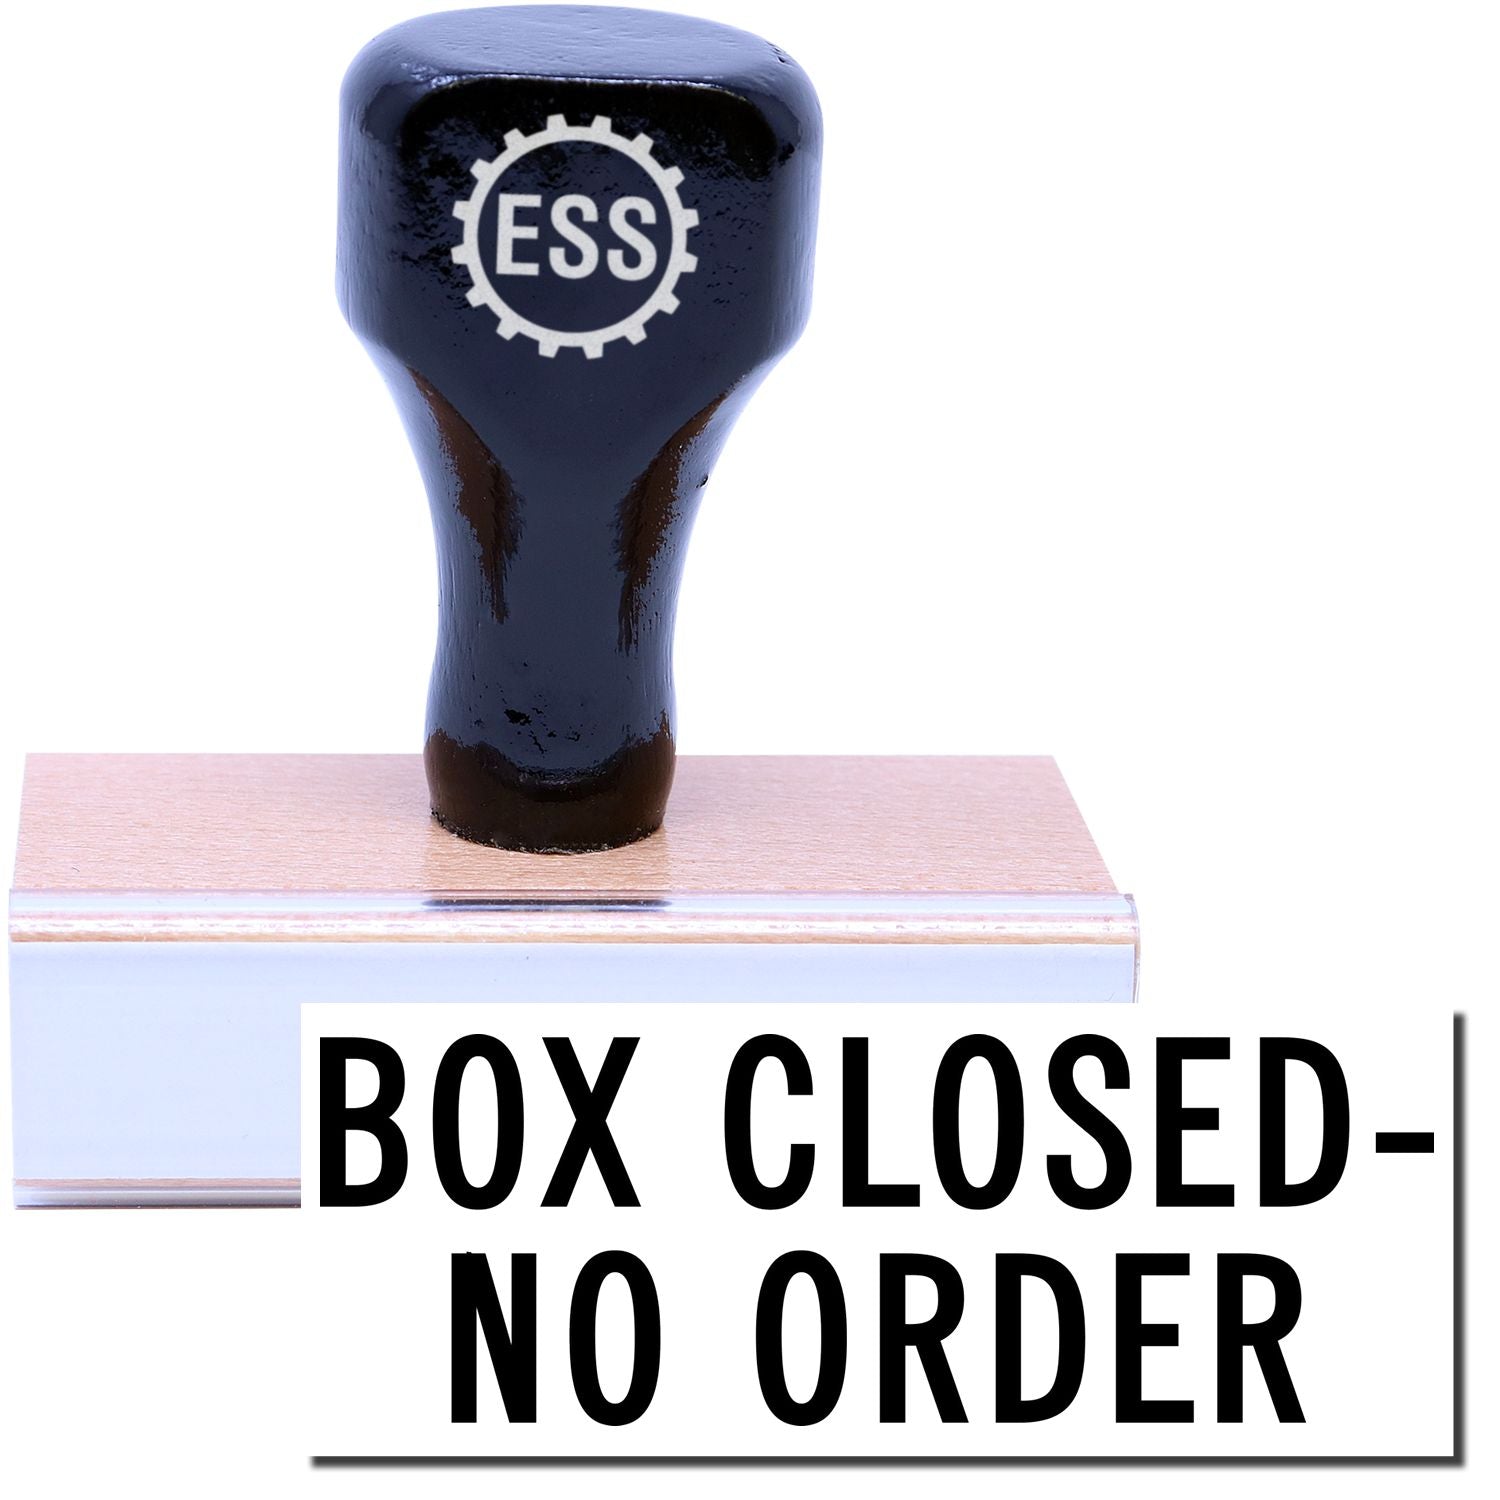 A stock office rubber stamp with a stamped image showing how the text "BOX CLOSED - NO ORDER" is displayed after stamping.